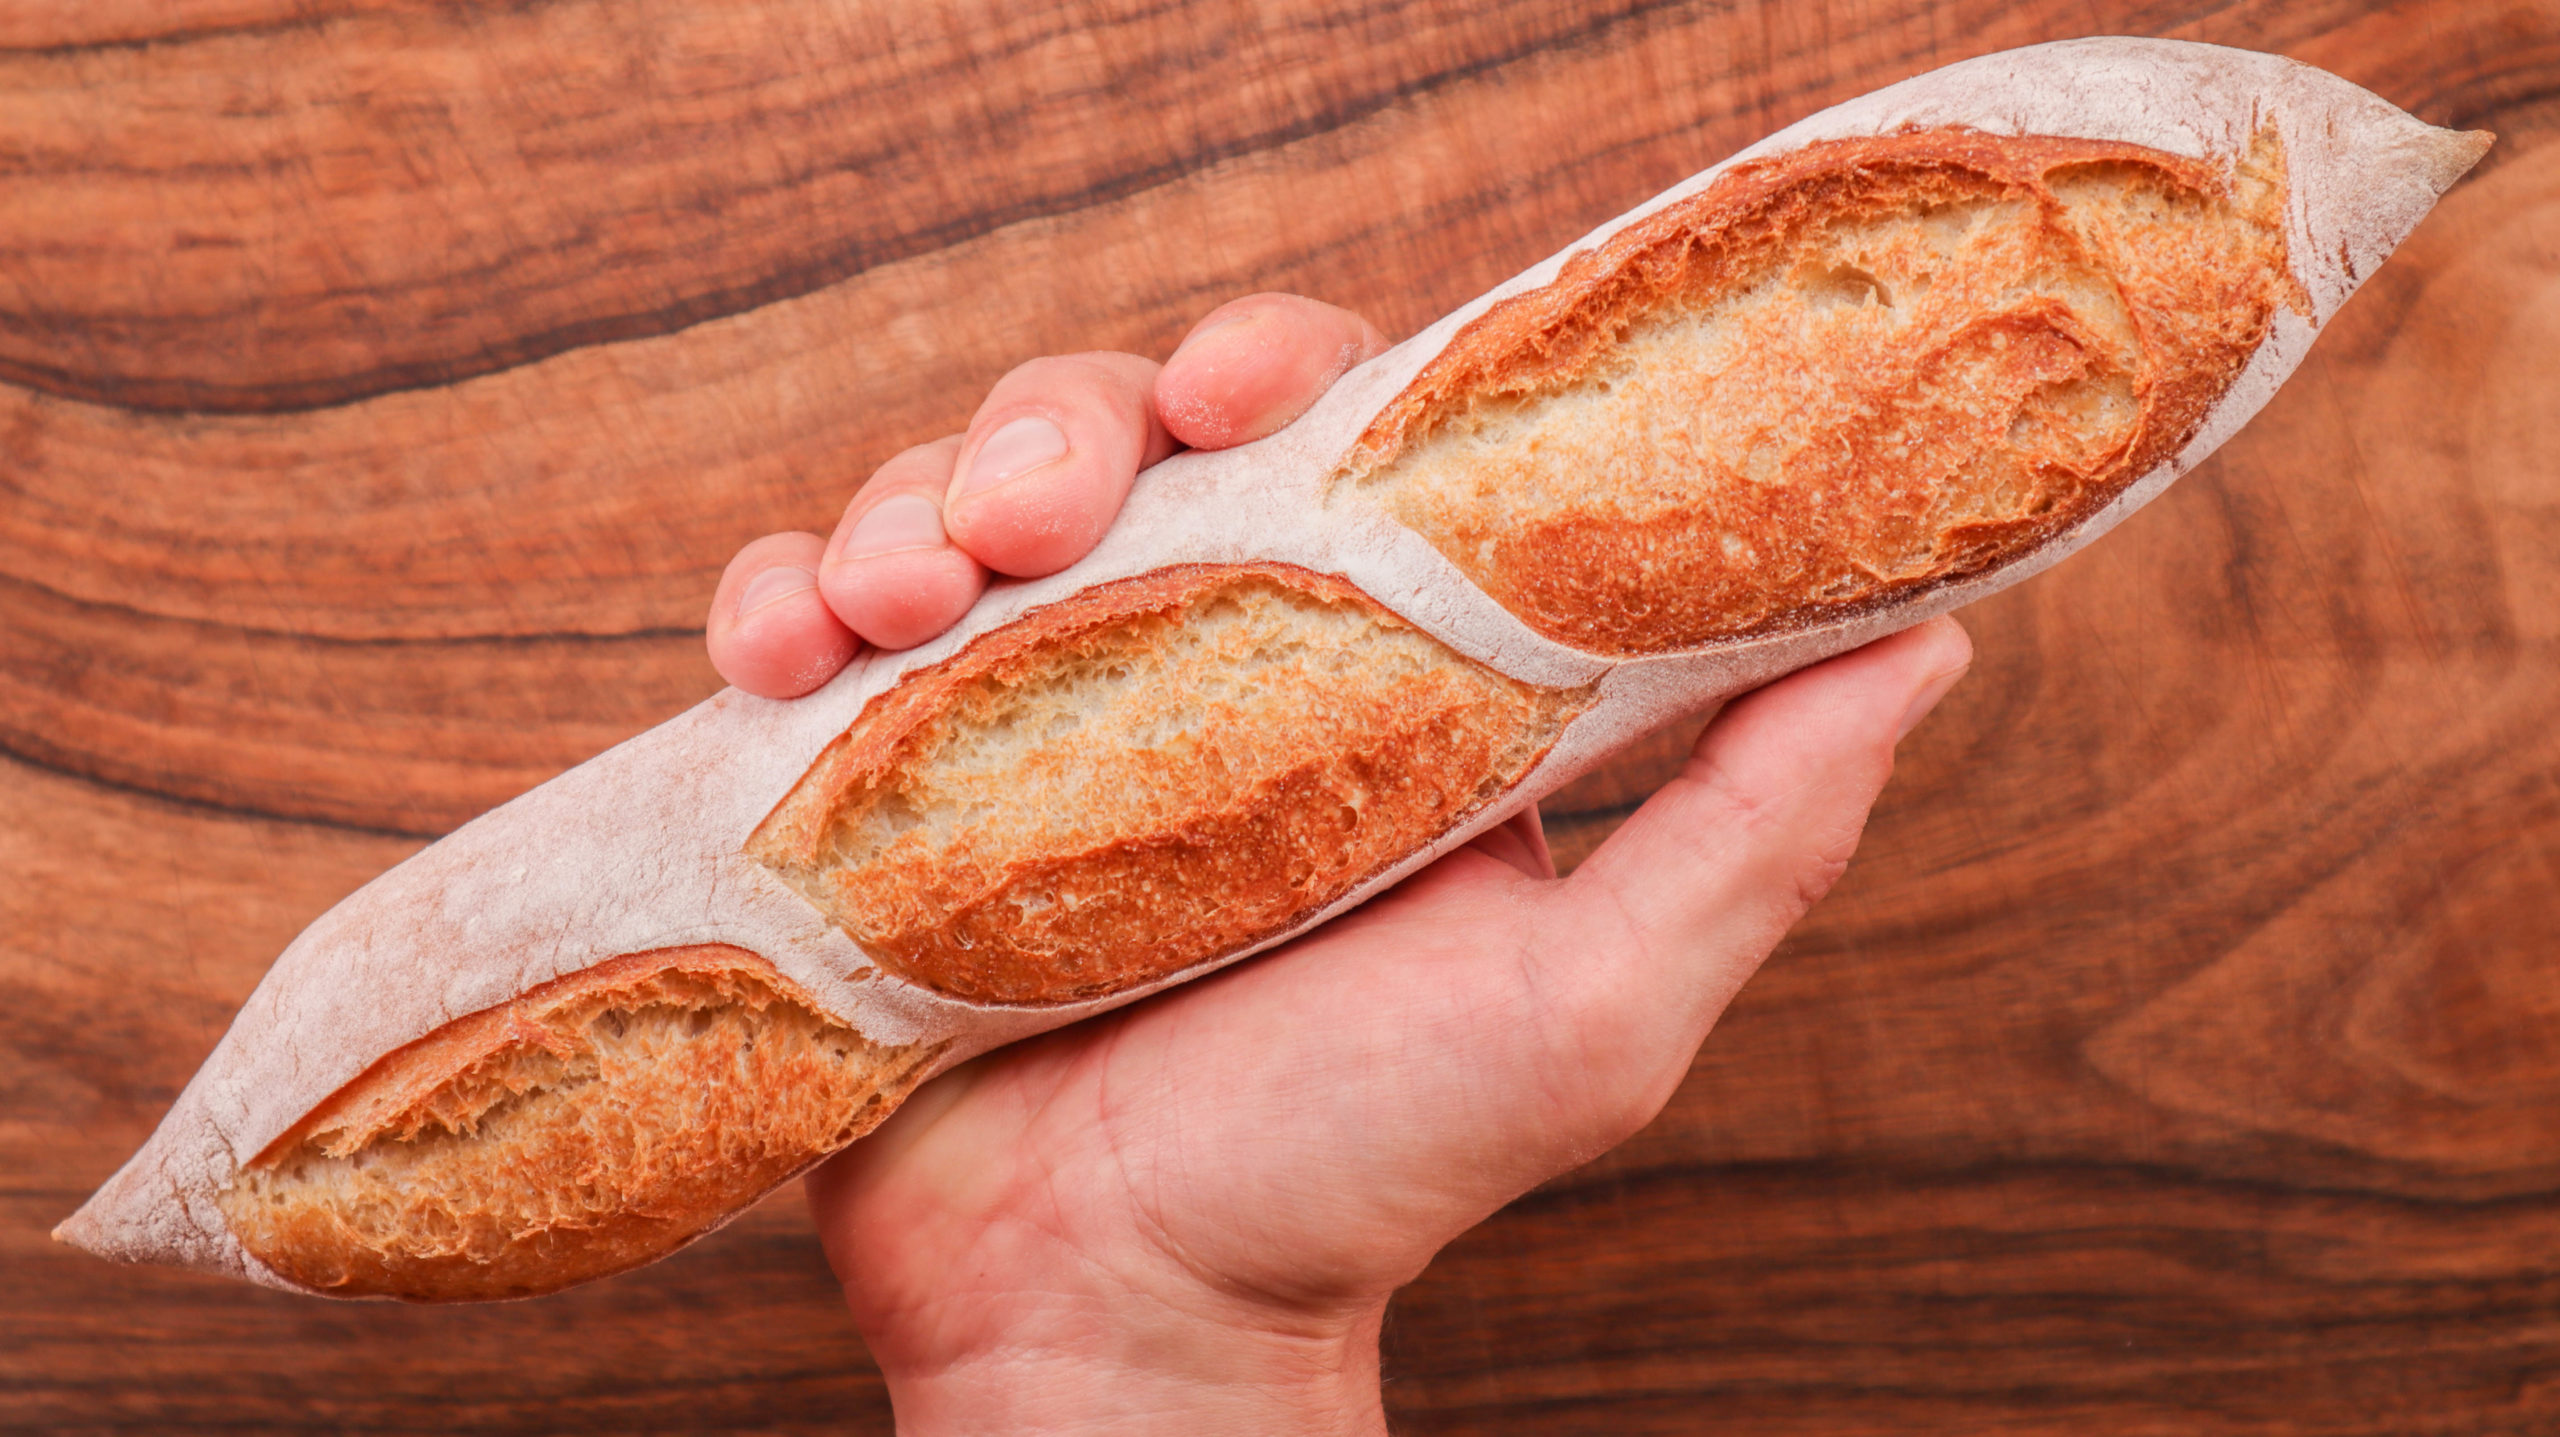 How to Make Beautiful, Crispy & Flavourful No-Knead Baguettes